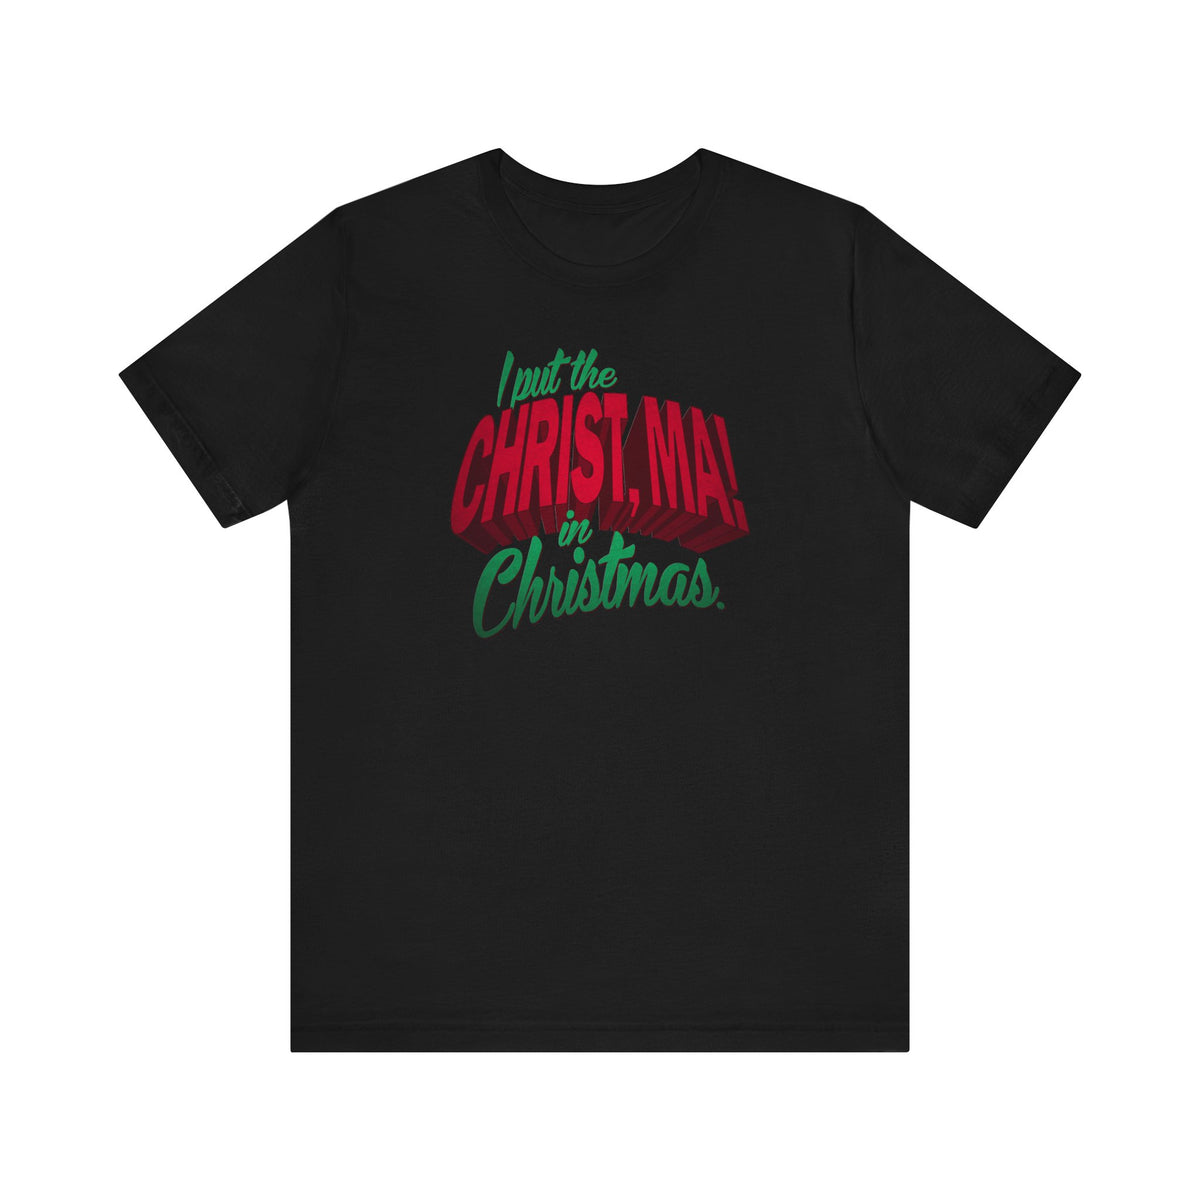 I Put The Christ Ma! In Christmas. - Men's T-Shirt